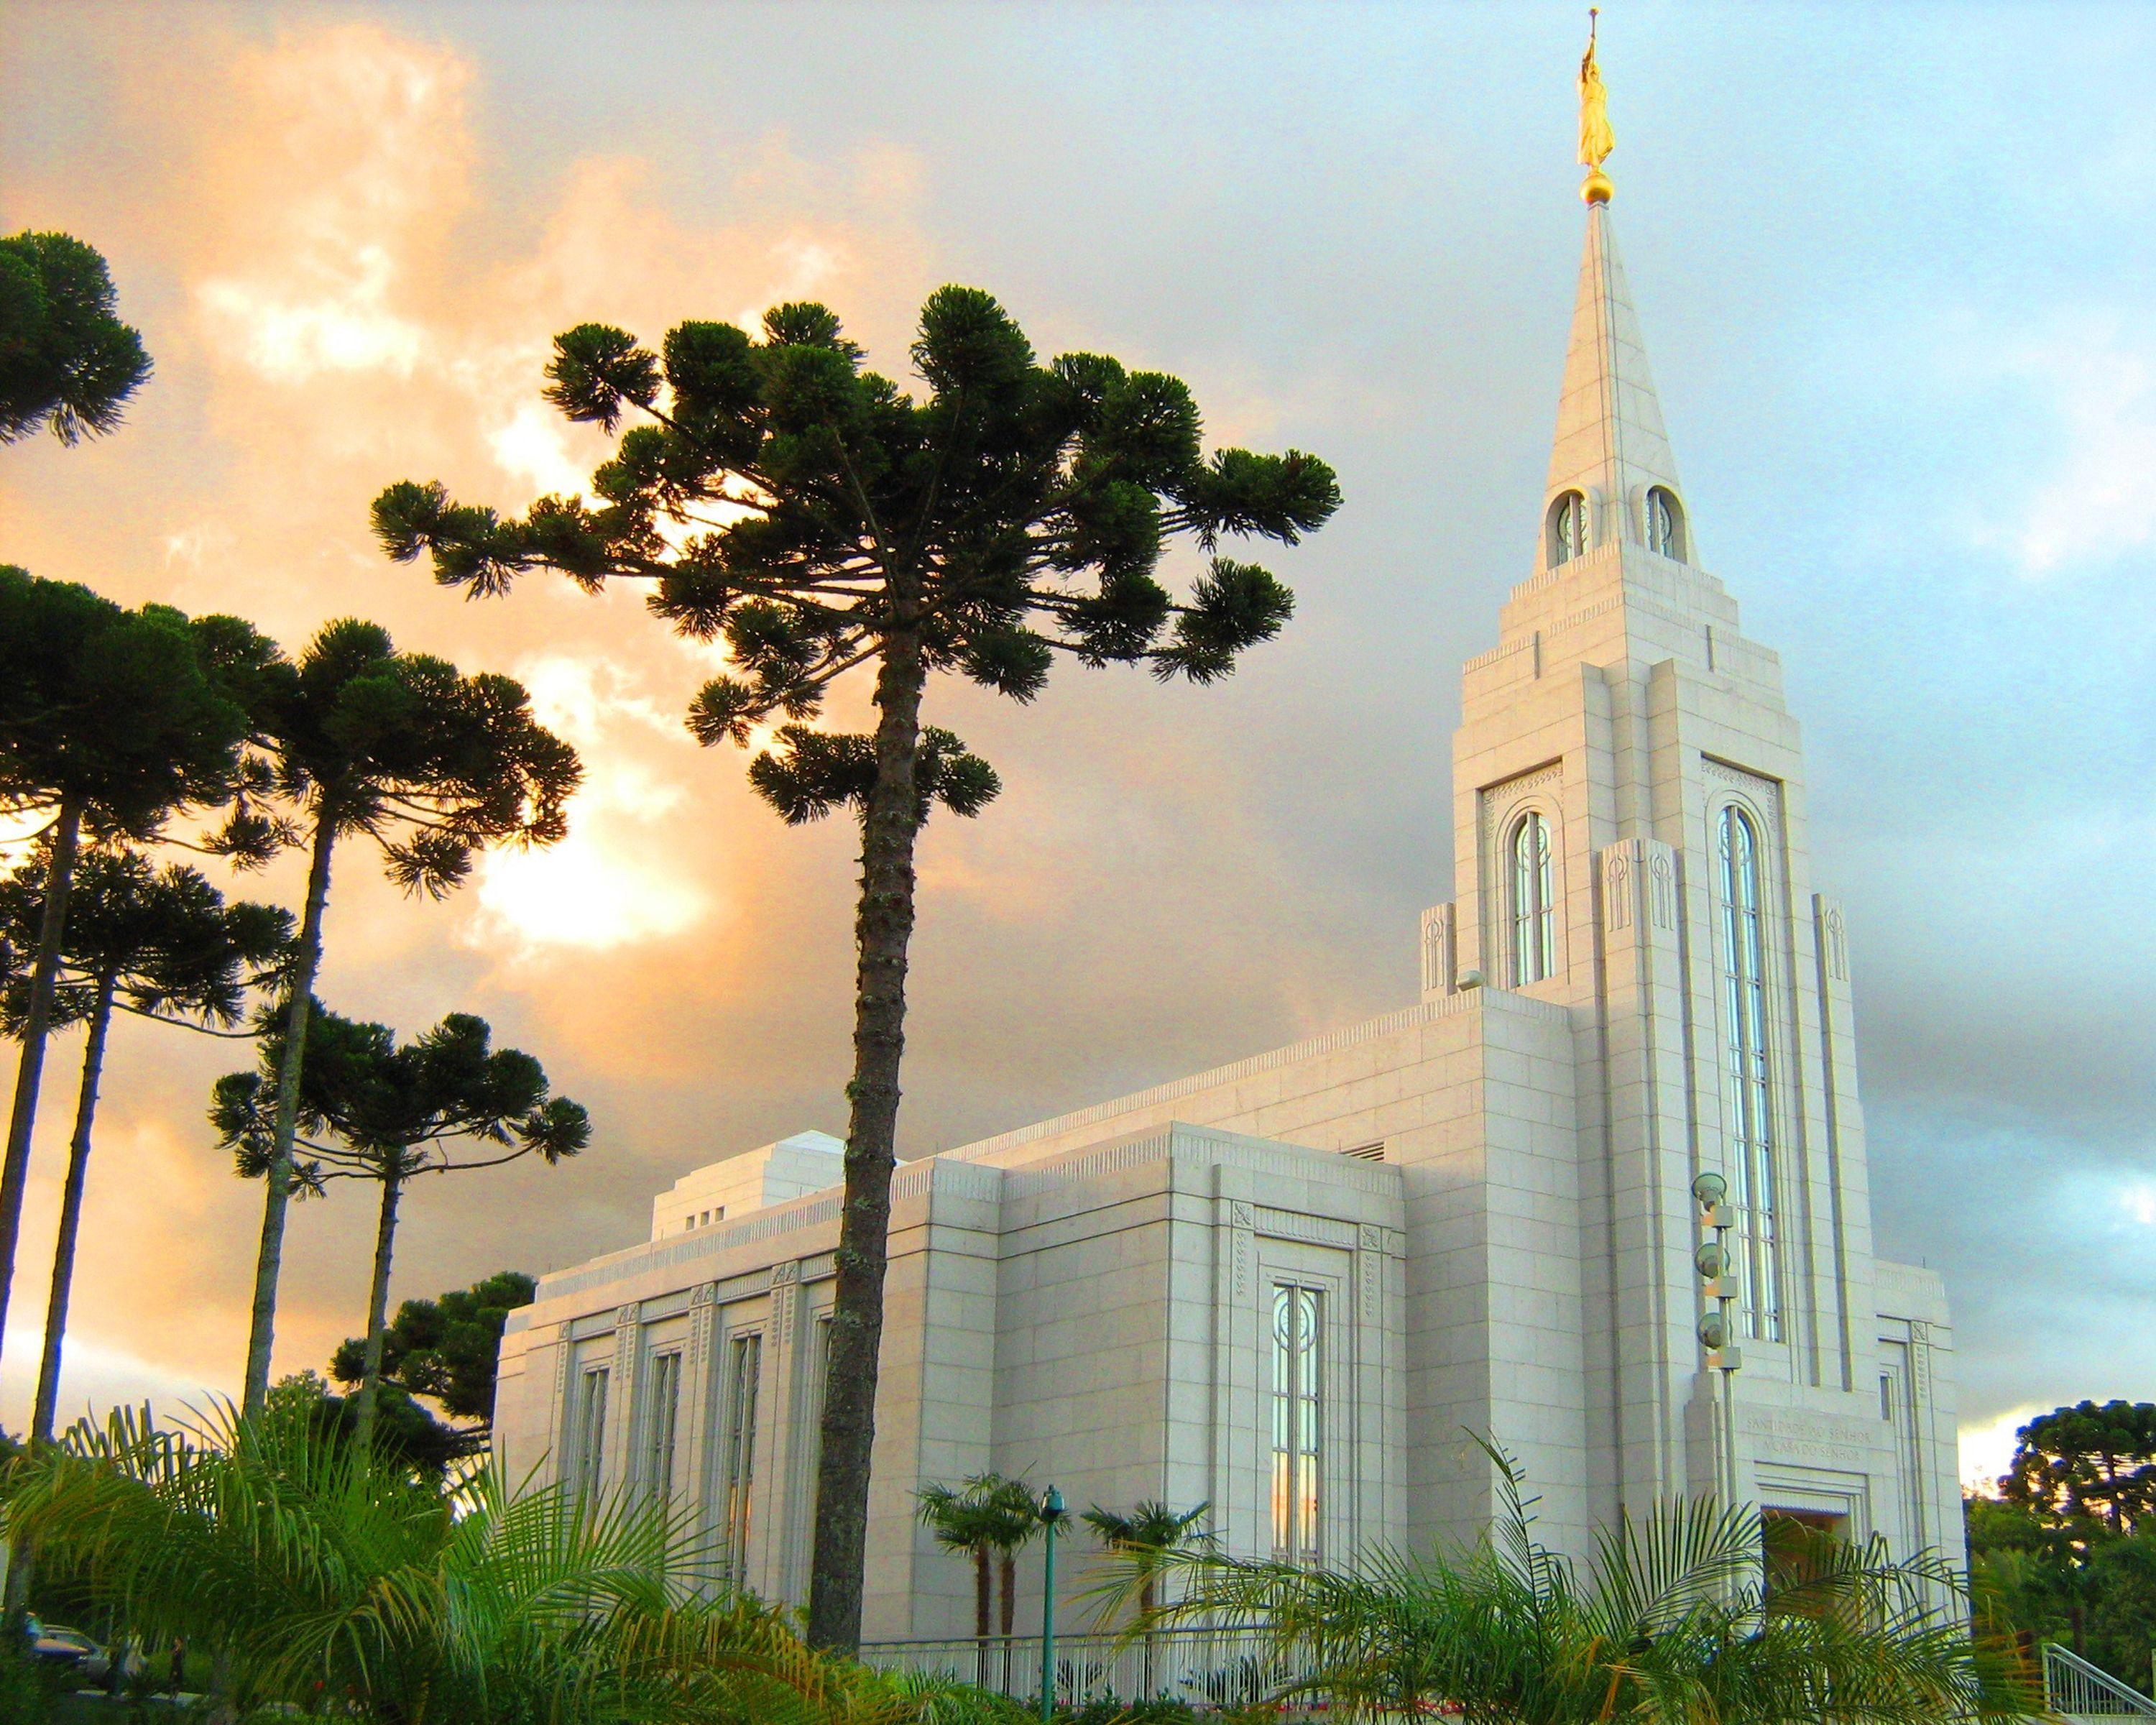 Lds Temple Wallpapers Top Free Lds Temple Backgrounds Images, Photos, Reviews